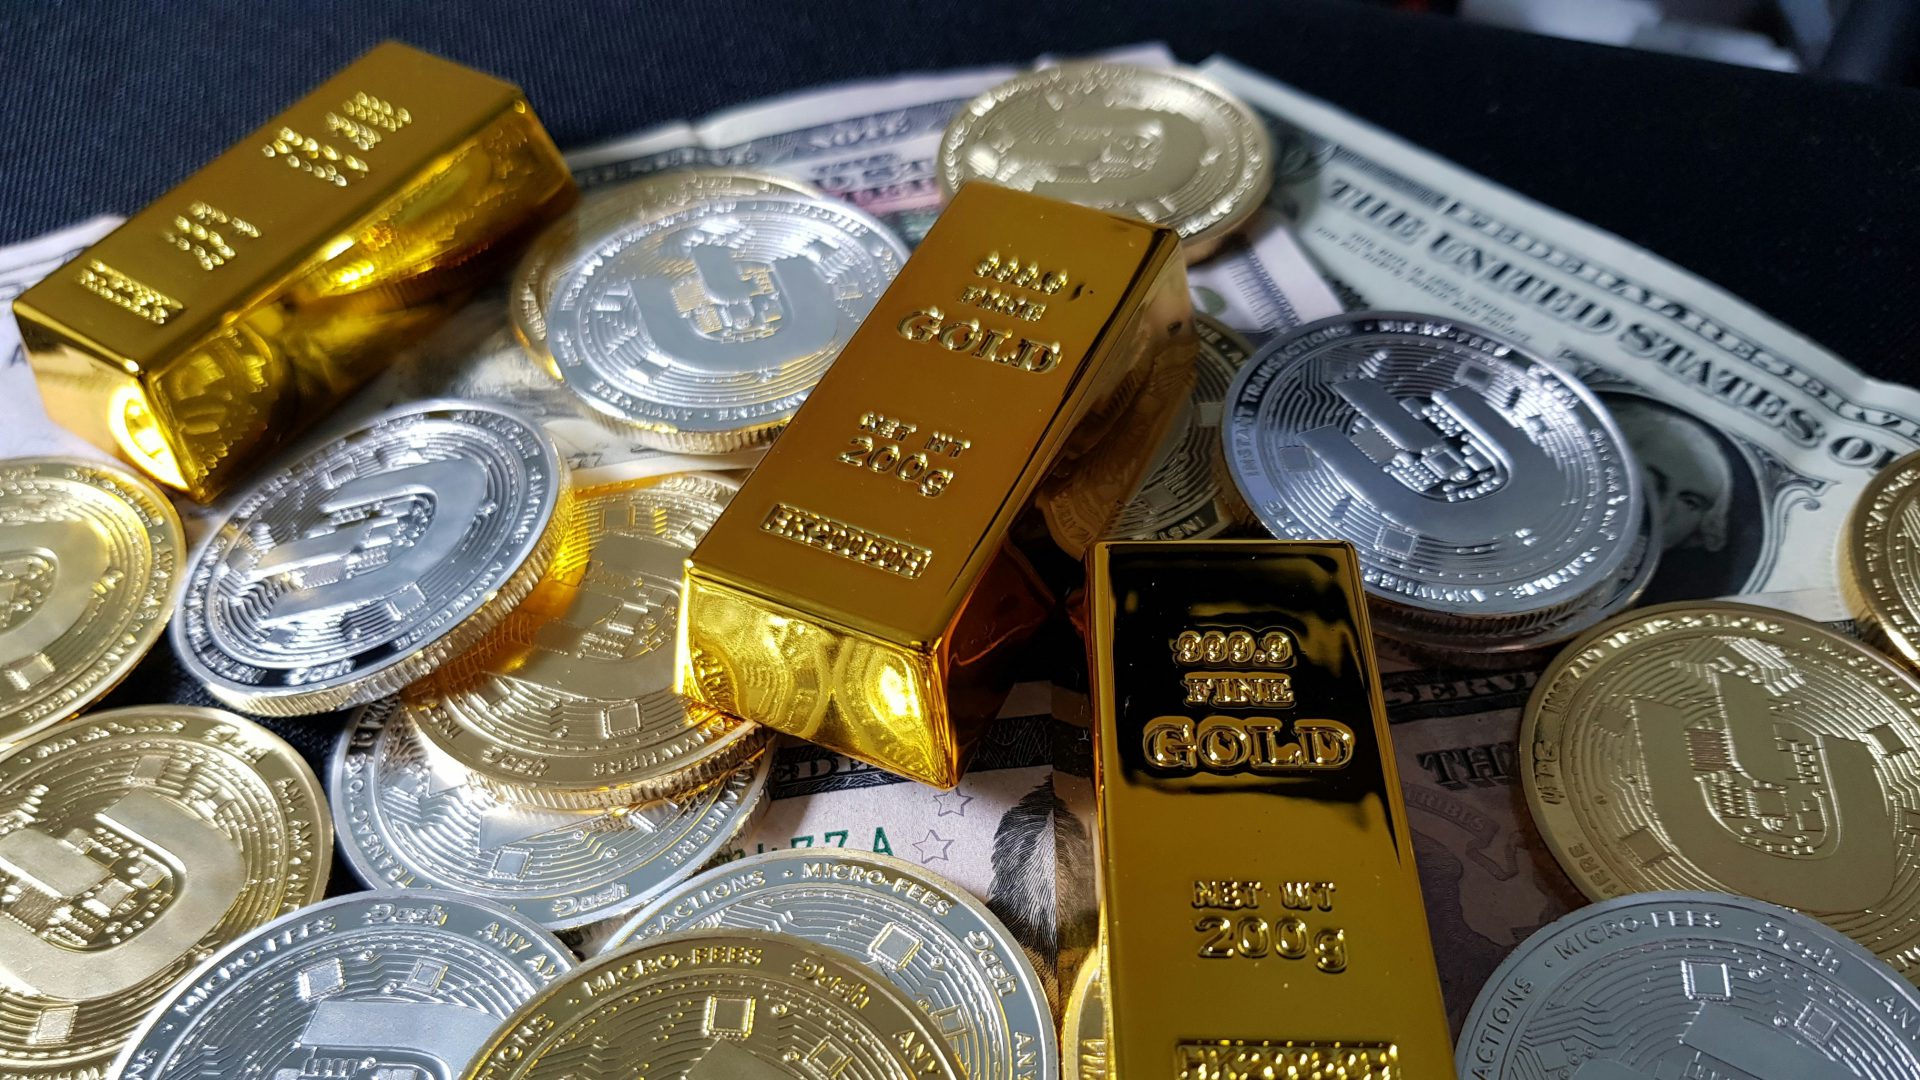 Don’t Sell Gold & Silver, Buy More When it Dips’ Says US Millionaire